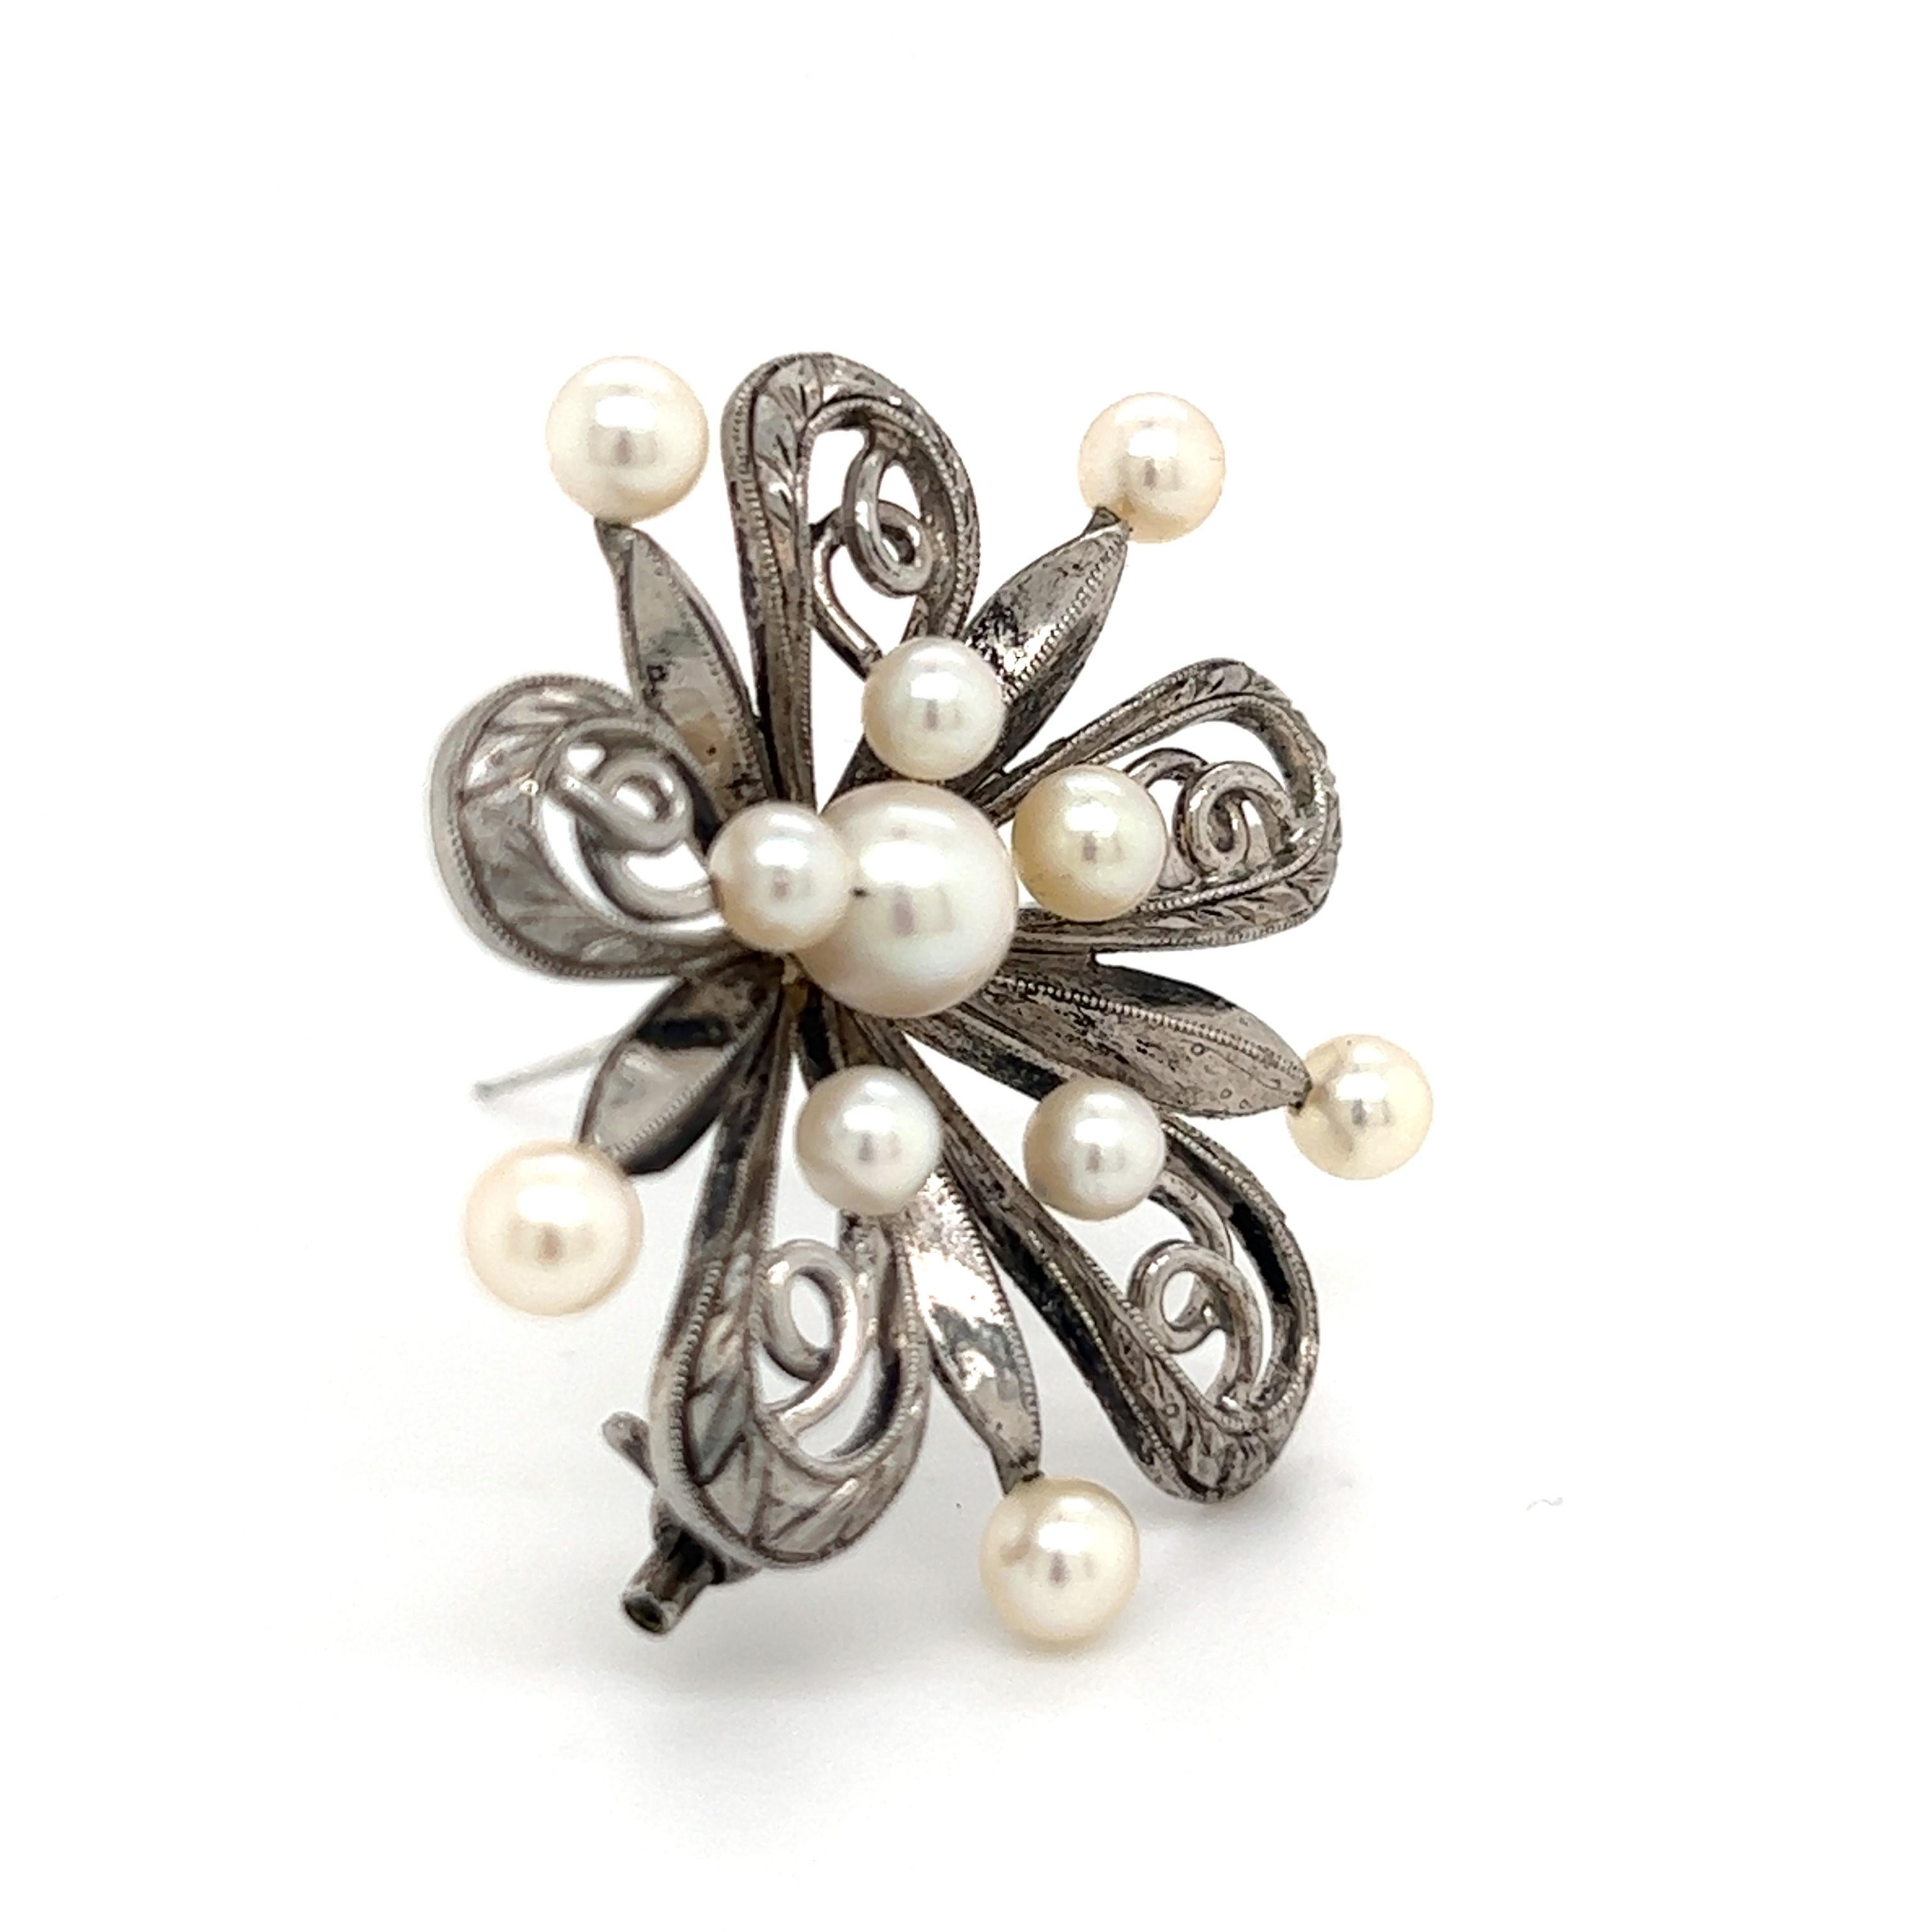 Mikimoto Estate Akoya Pearl Brooch Sterling Silver 6 mm M281

This elegant Authentic Mikimoto Estate sterling silver brooch has 11 Saltwater Akoya Cultured Pearls and has a weight of 7.9 Grams.

TRUSTED SELLER SINCE 2002

PLEASE SEE OUR HUNDREDS OF